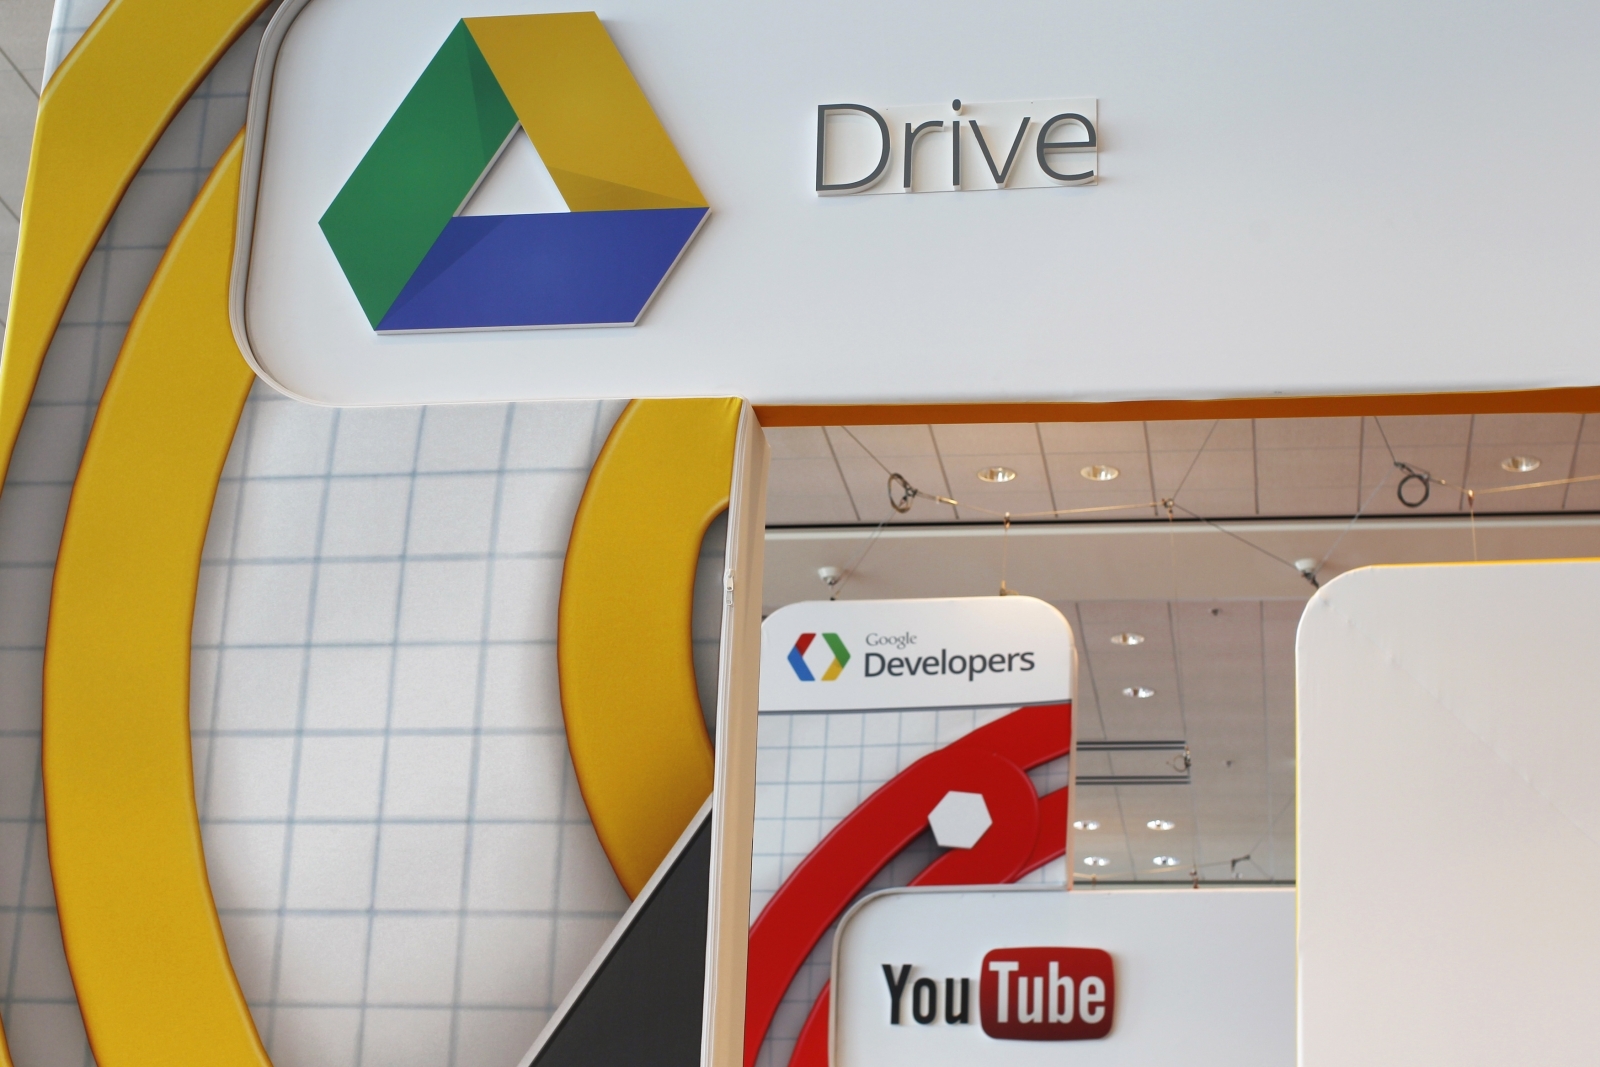 how to log out of google drive app